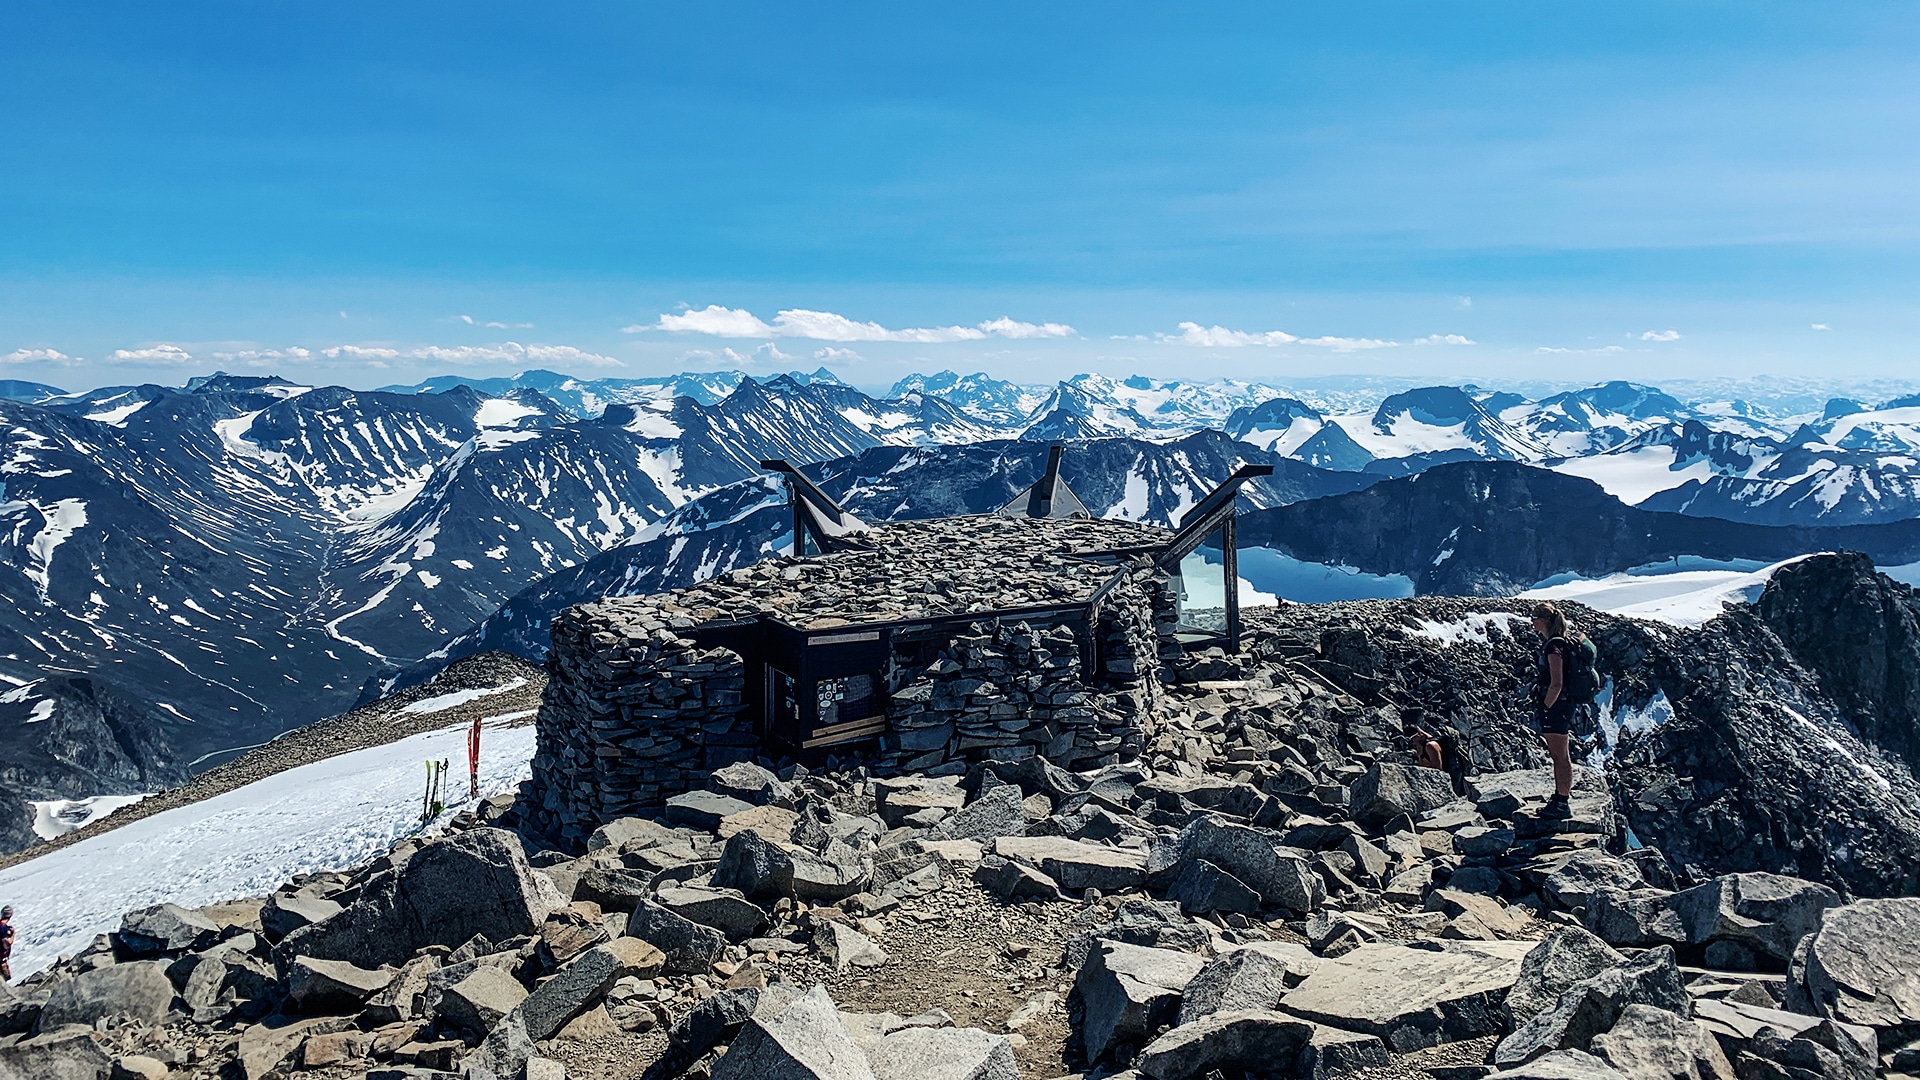 The stone cafe at the top on Galdhøpiggen with tall mountain tops in the distance.